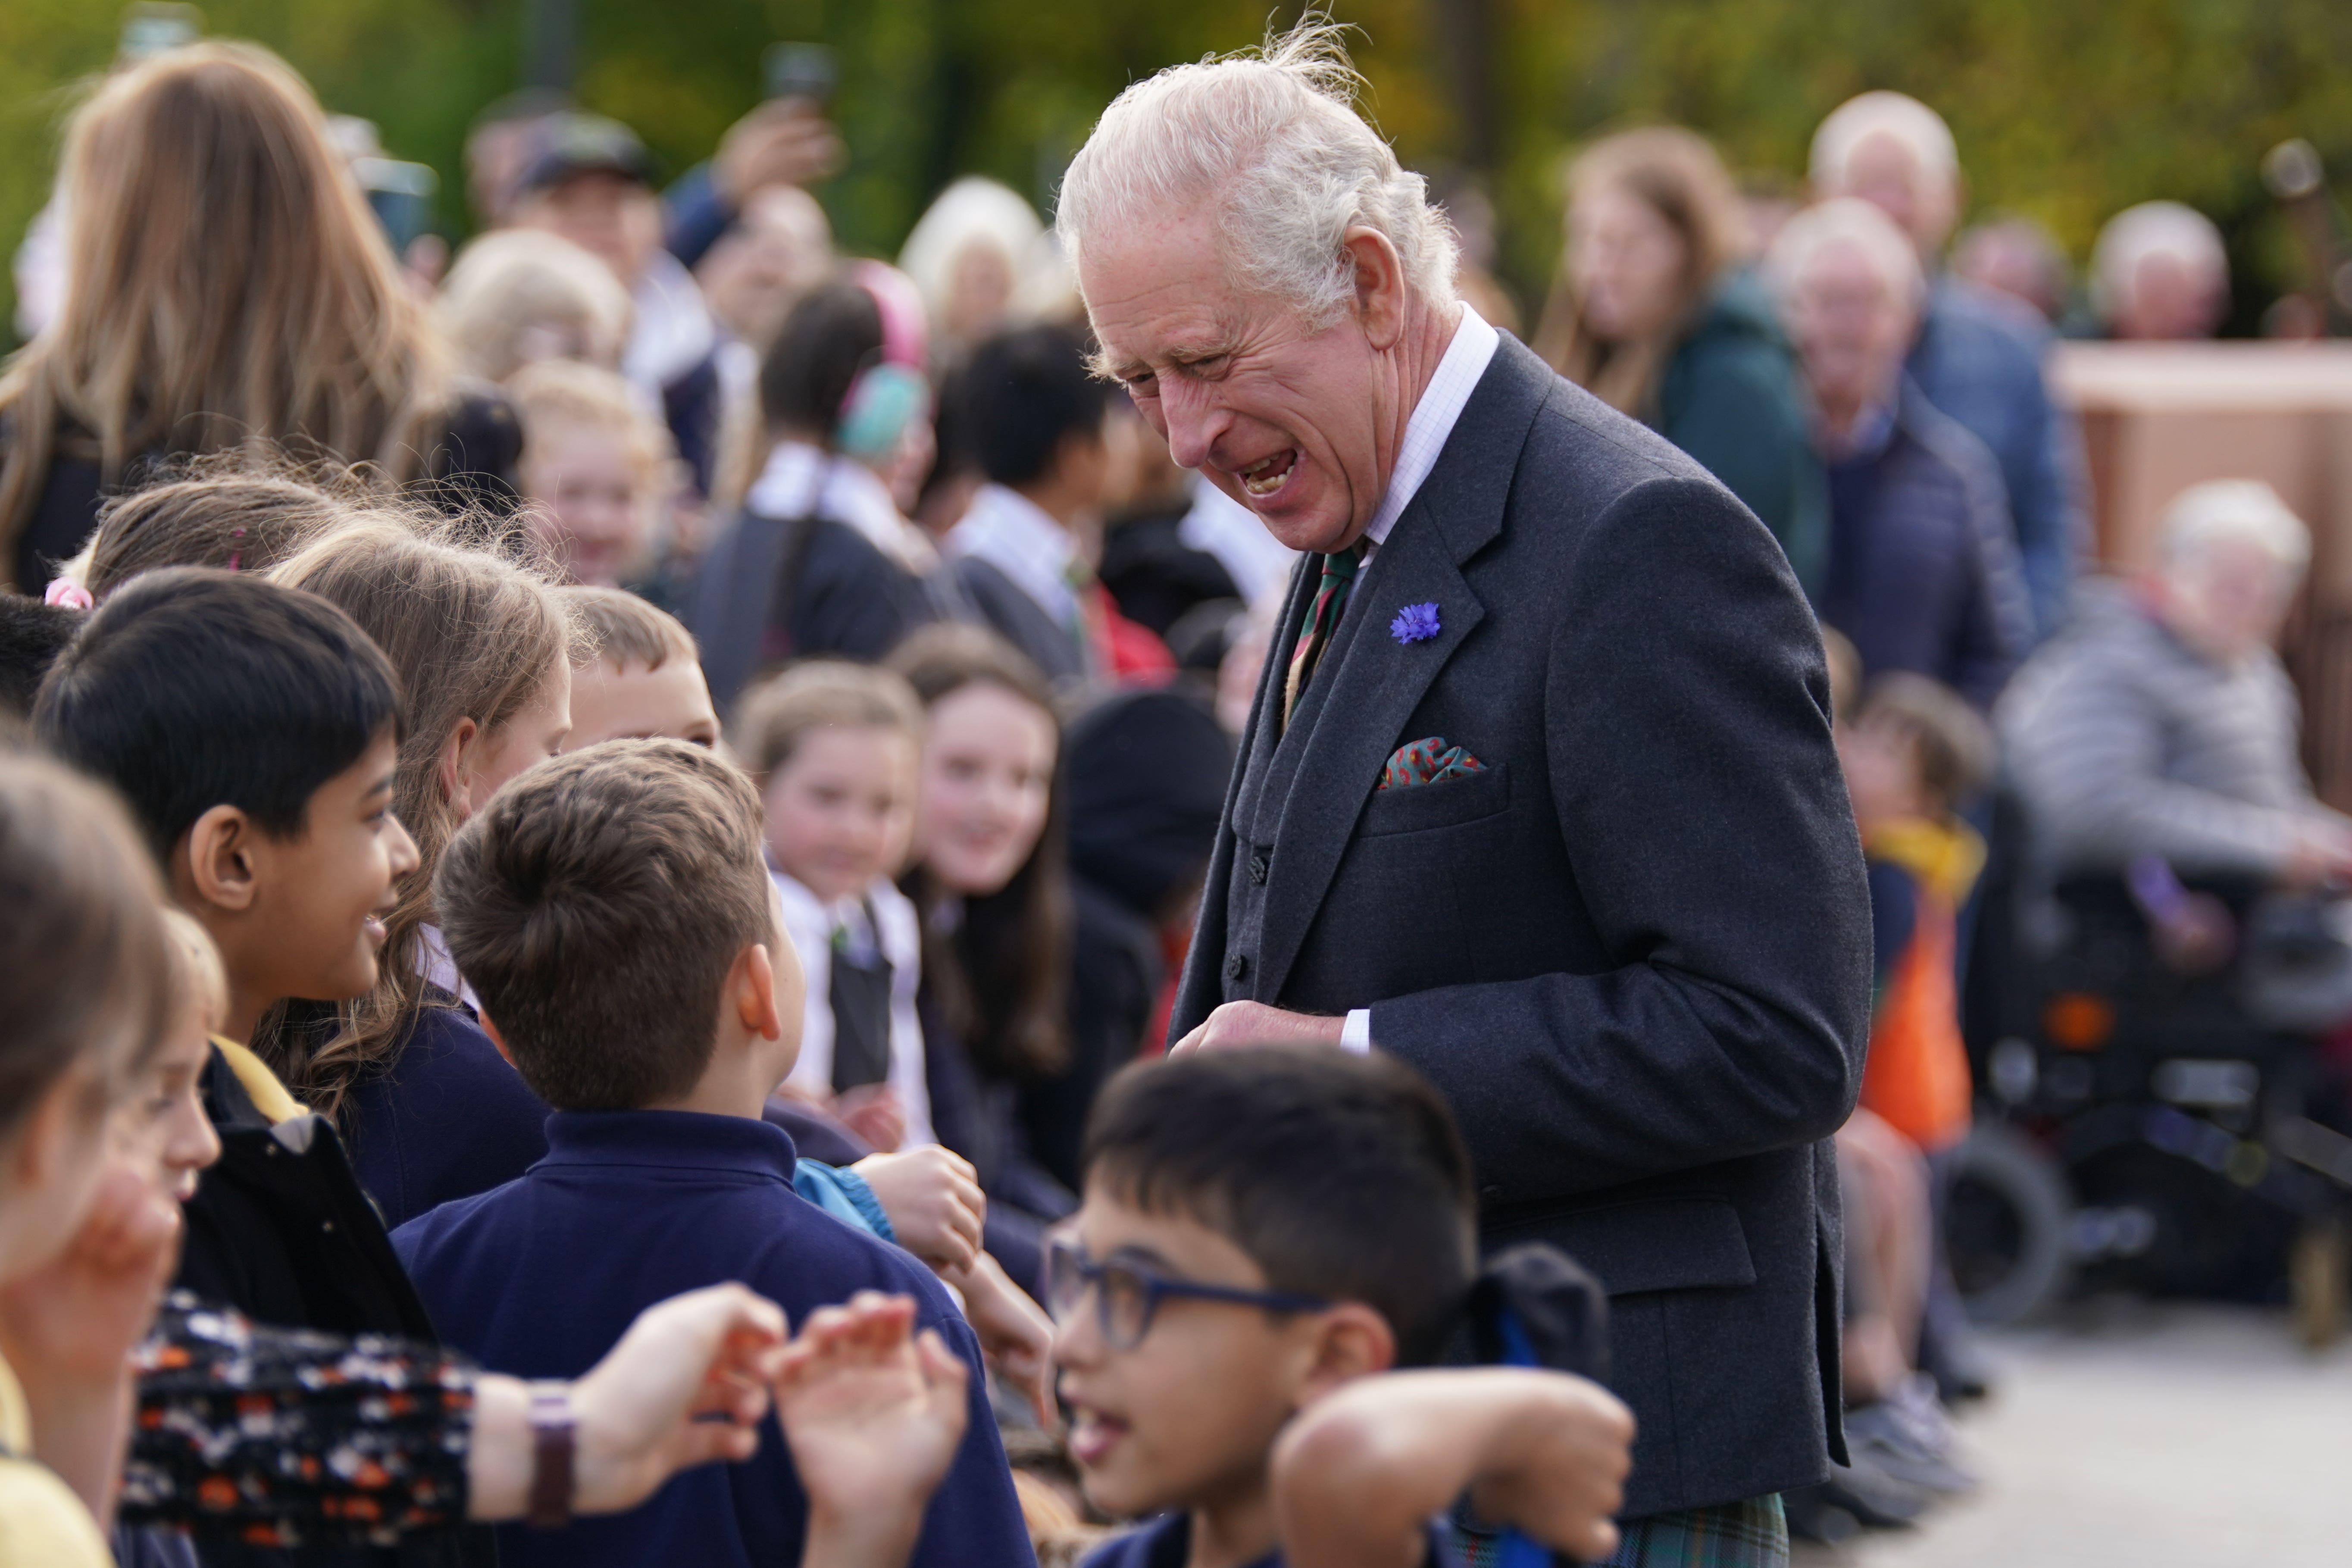 The King will meet refugee families on a visit to Aberdeen on Monday. (Andrew Milligan/PA)